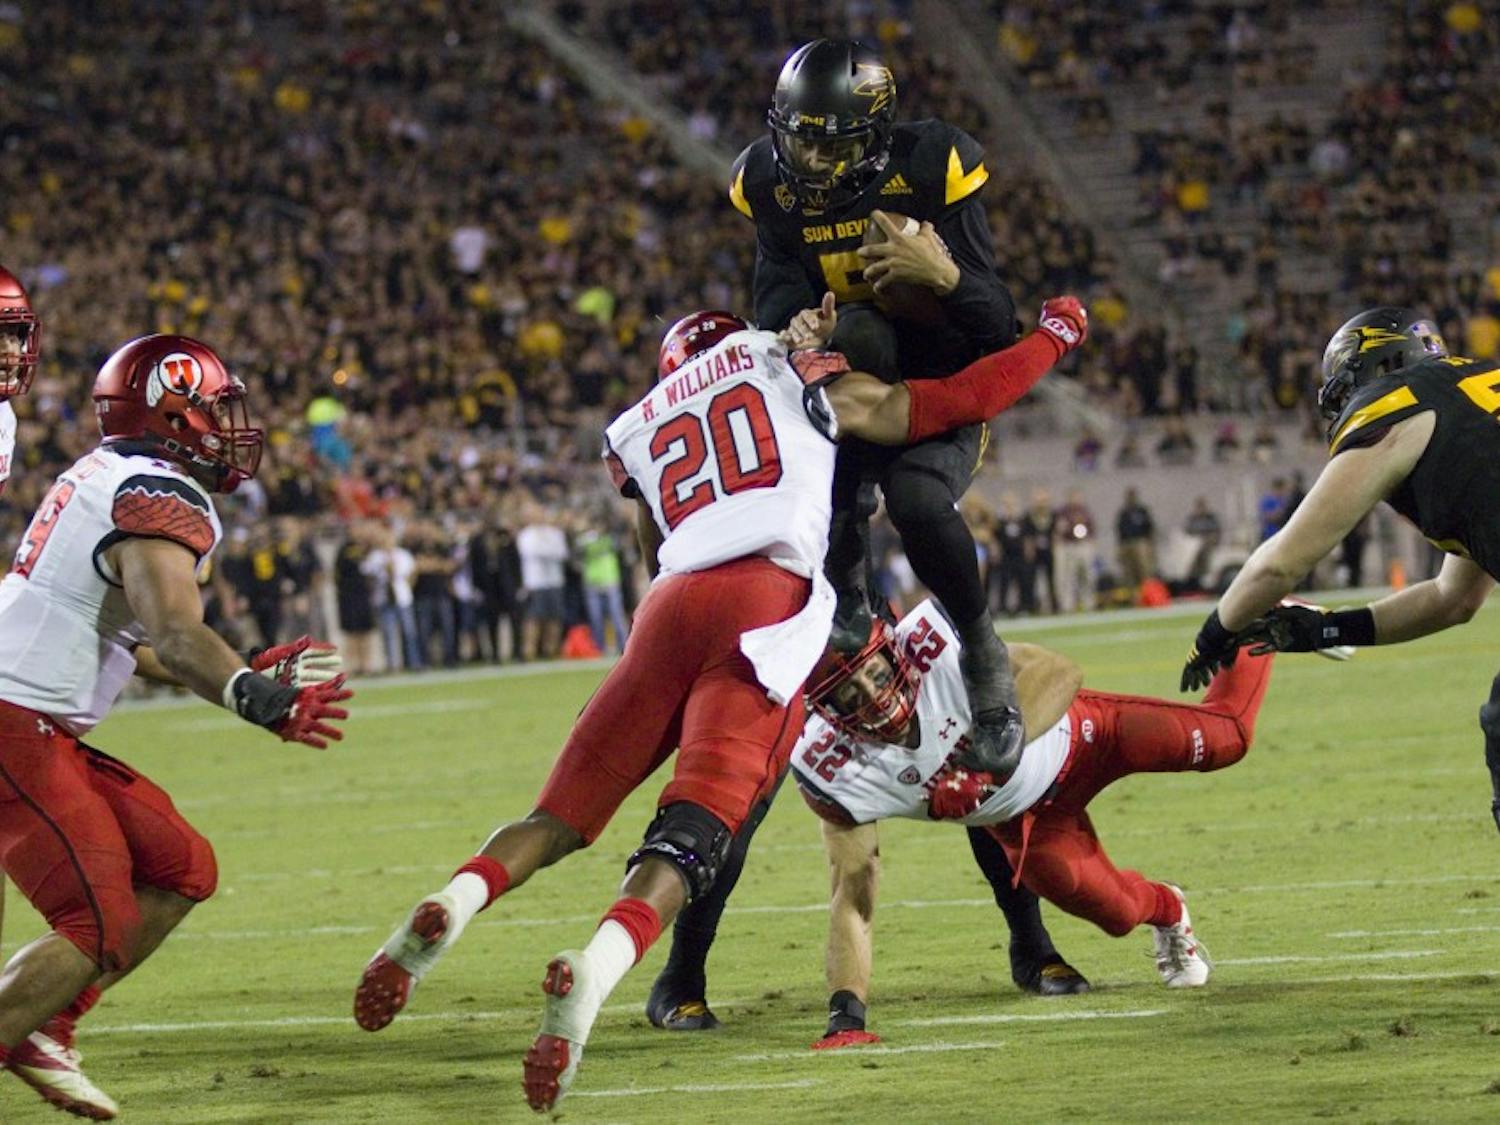 ASU sophomore quarterback Manny Wilkins (5) tries to hurdle a Utah free safety Marcus Williams on the goal line in the first half of a game versus the Utah Utes in Sun Devil Stadium in Tempe, Arizona, on Thursday, Nov. 10, 2016. 